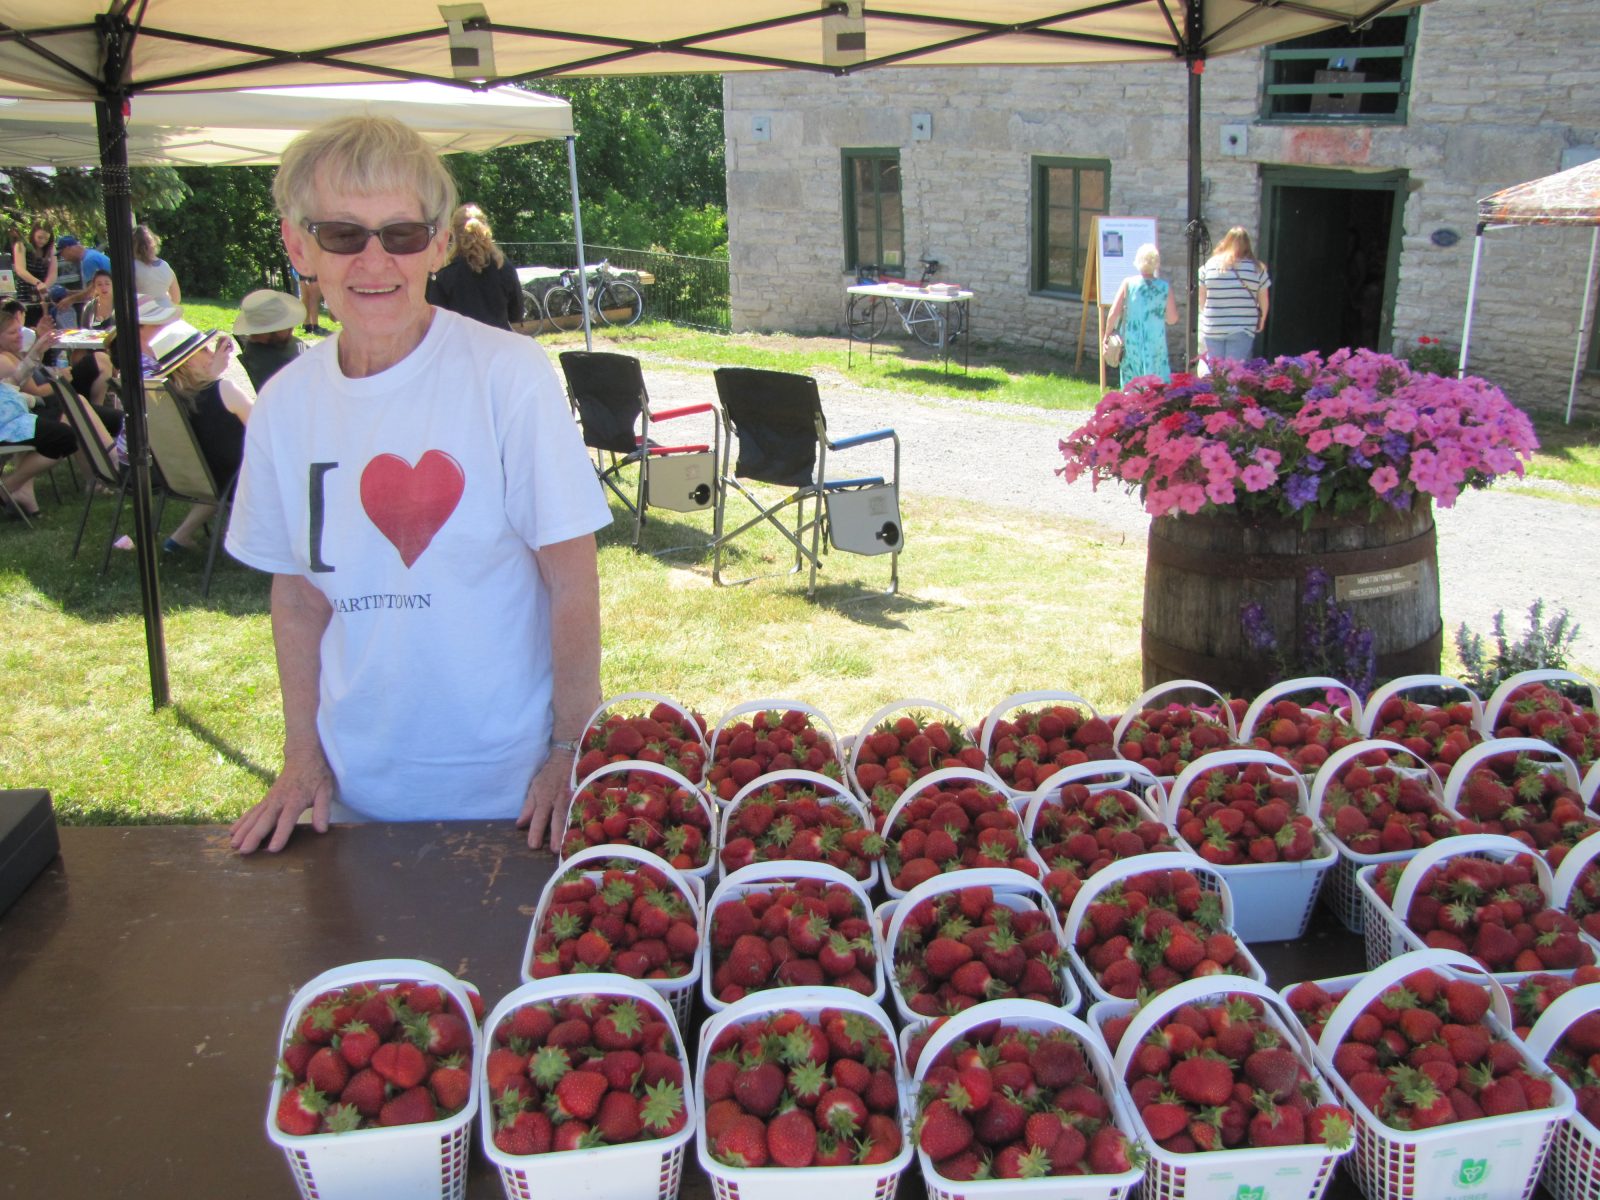 Sweet taste of Charity on show at the Martintown Strawberry Social